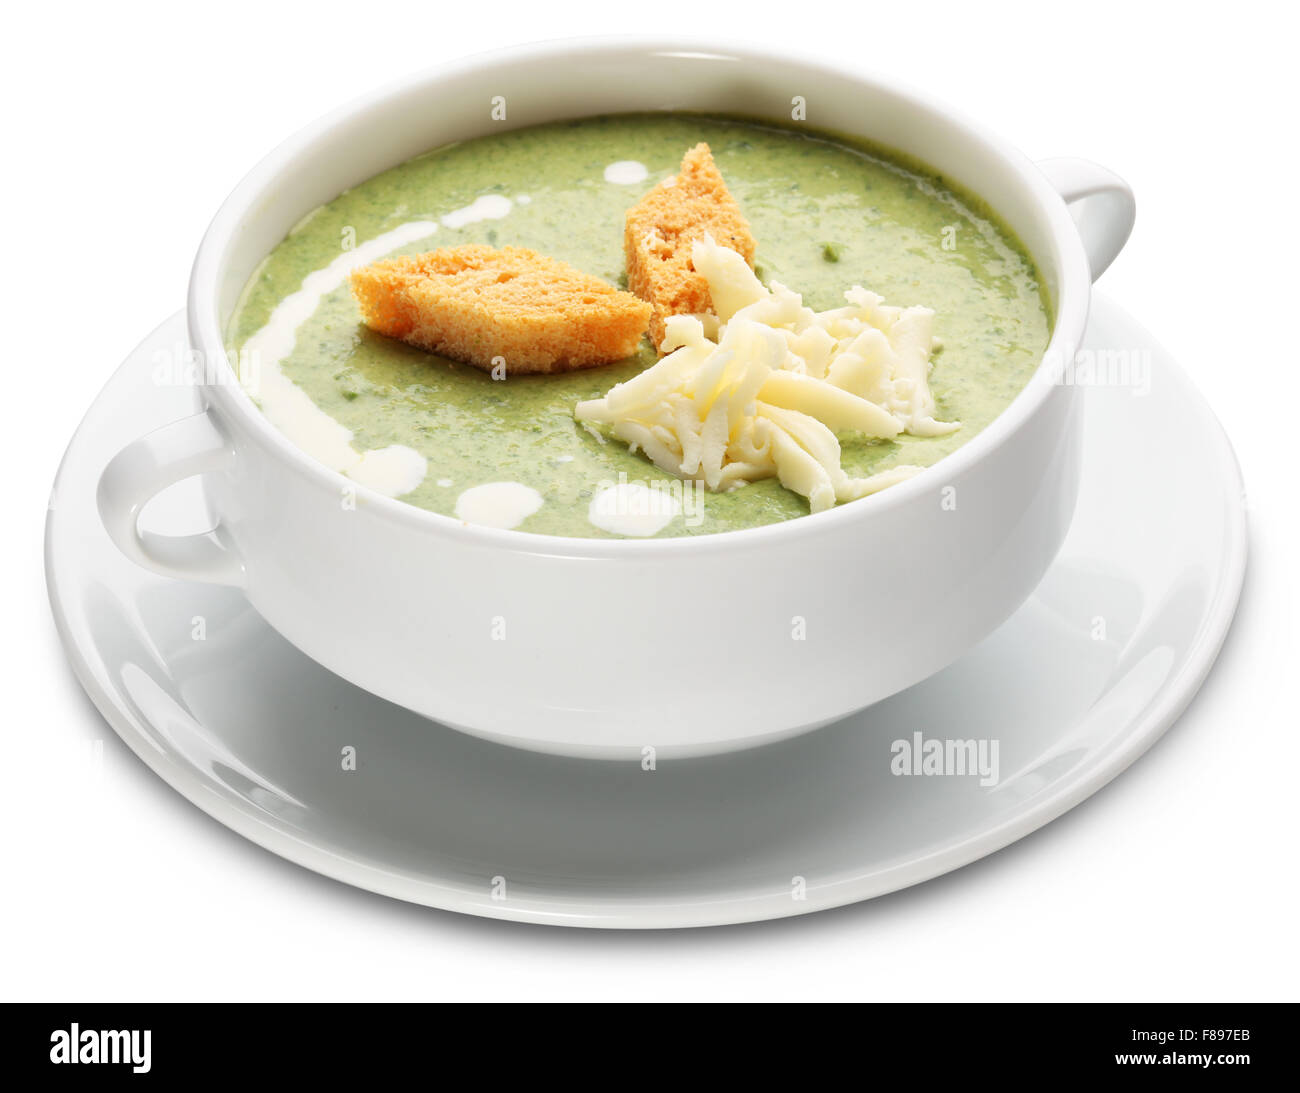 Cream soup of broccoli and cheese. File contains clipping paths. Stock Photo